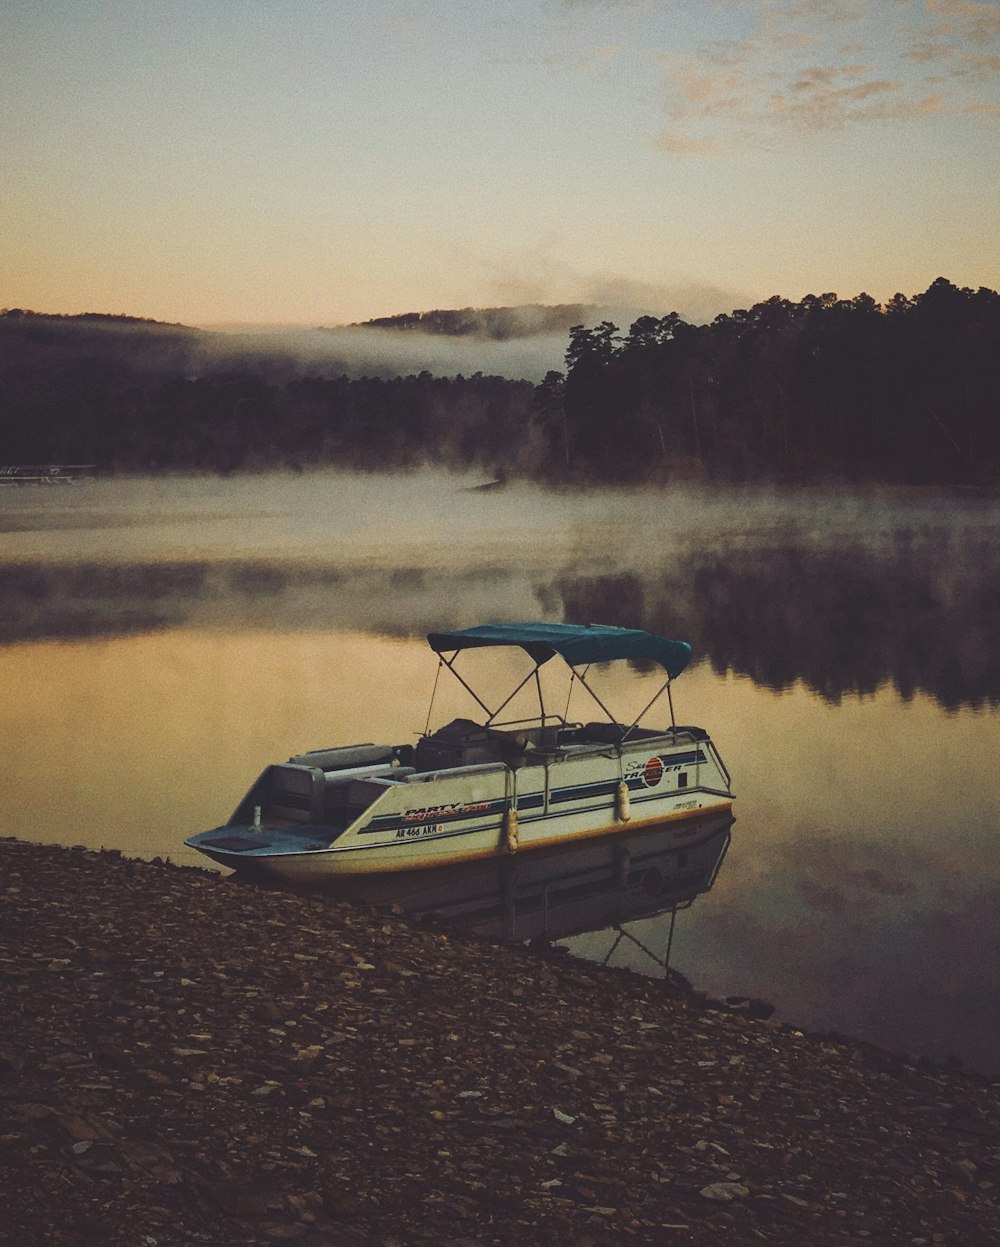 white speedboat on body of water near forest with fog